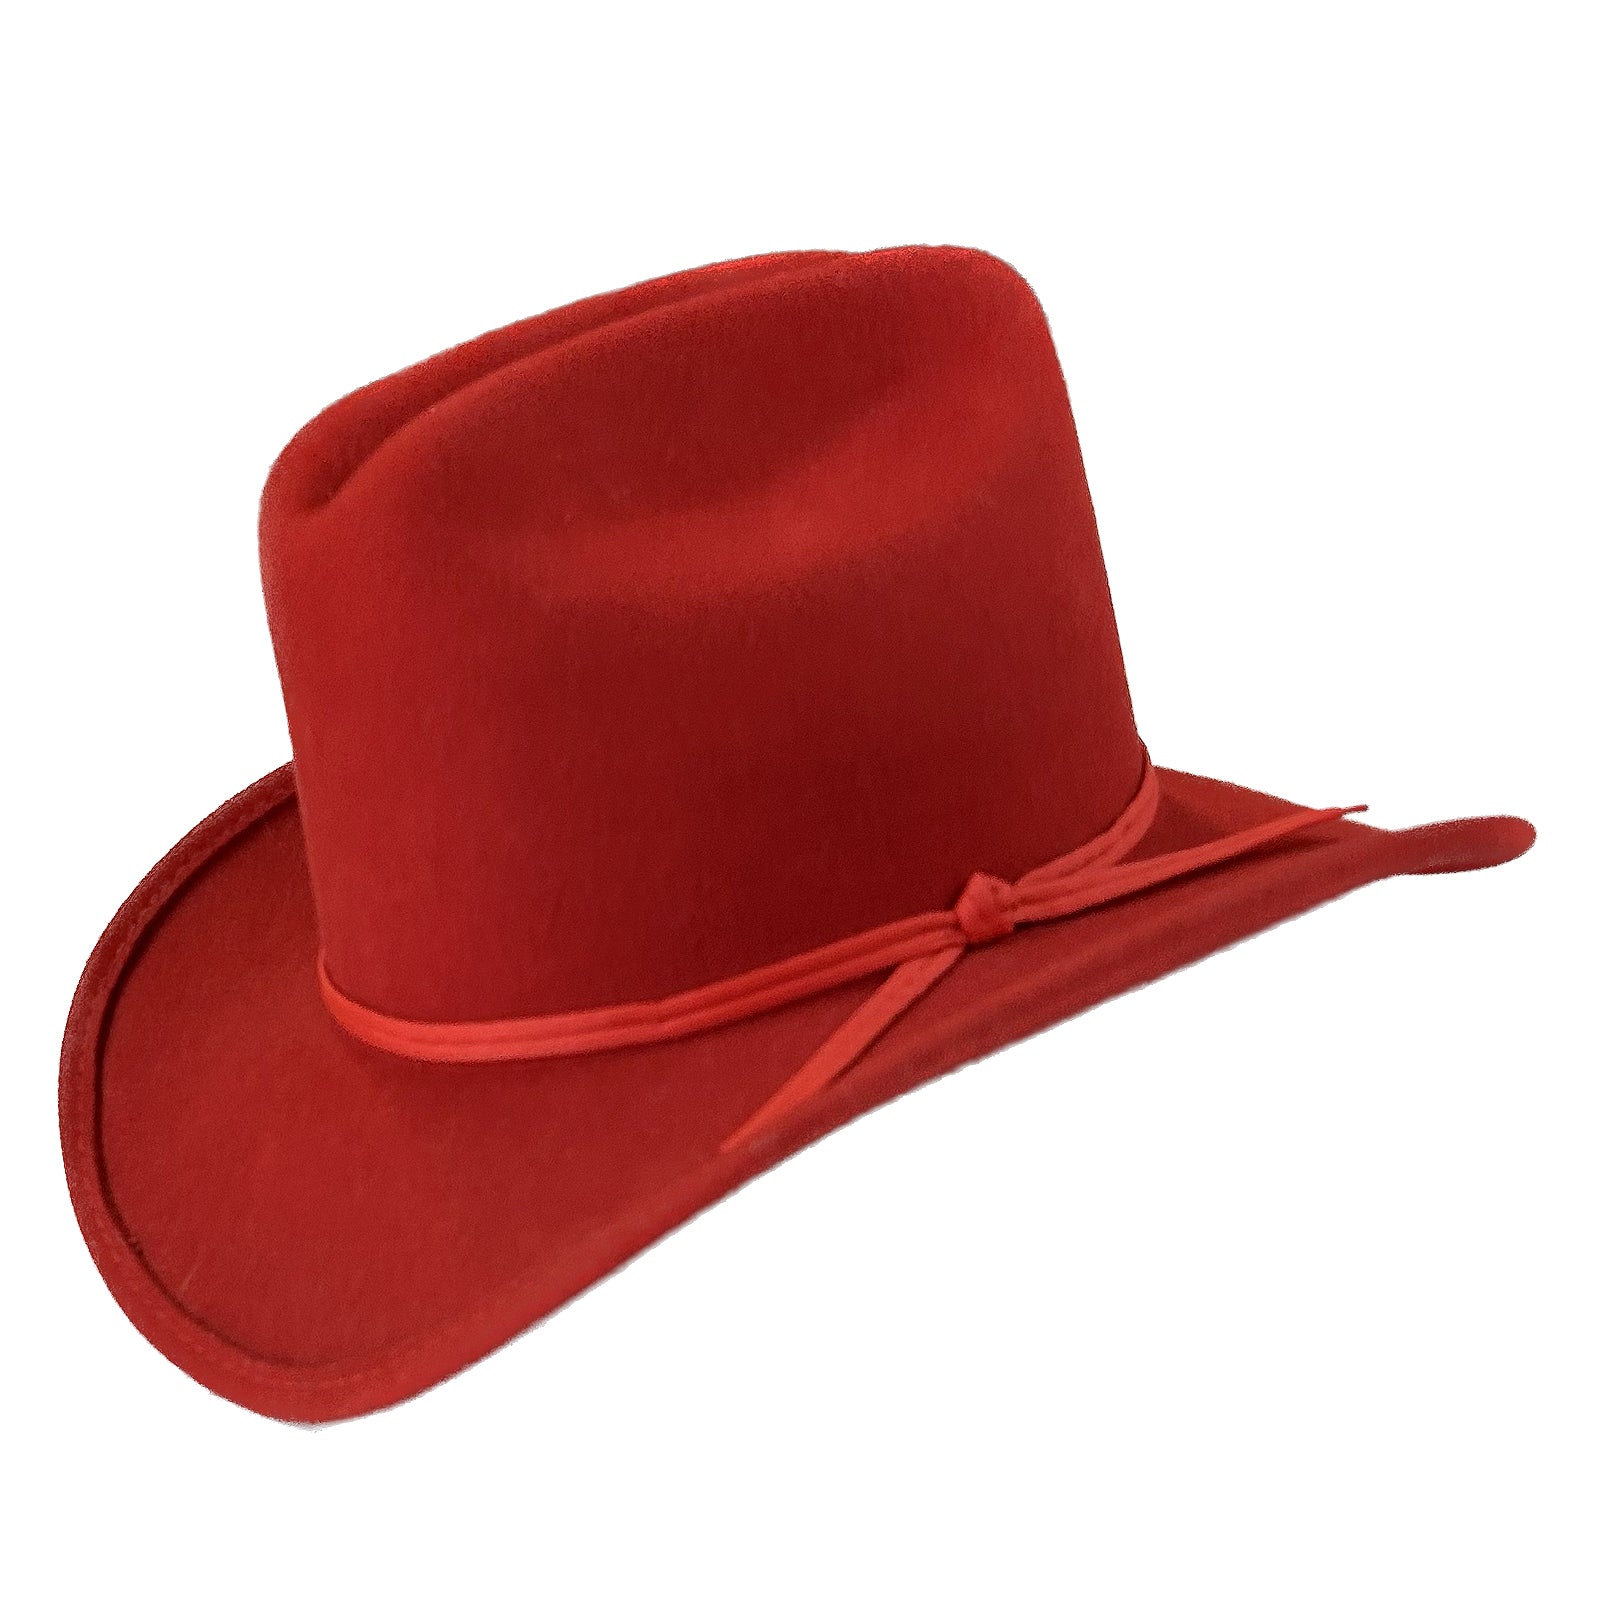 Kid's Red Felt Western Cowgirl Hat with Chin Strap - M